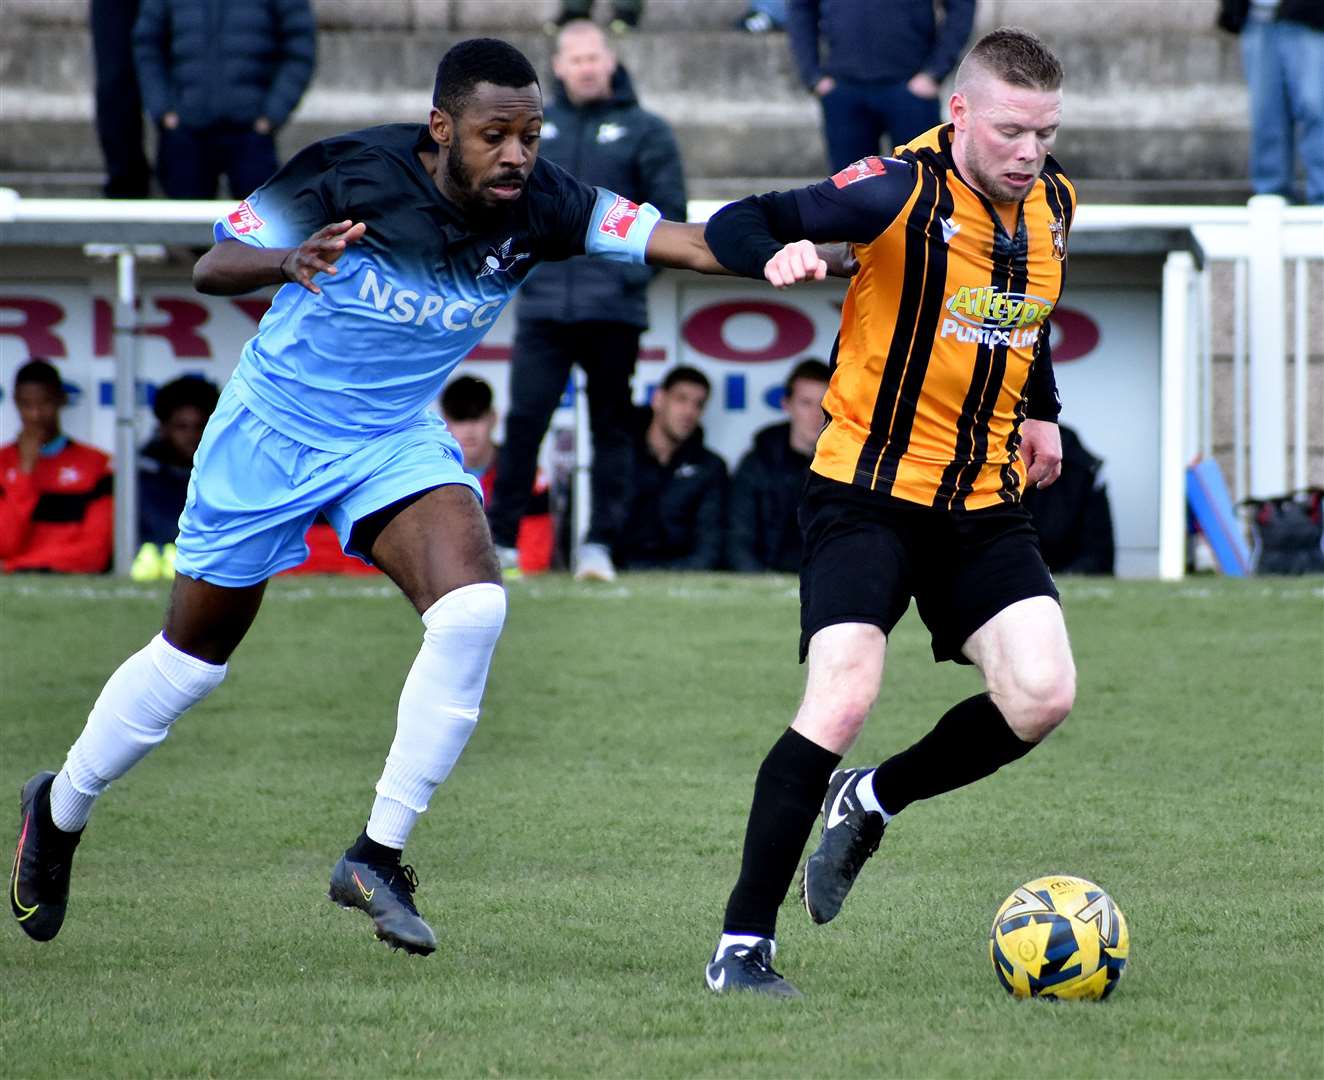 Scott Heard during Folkestone's goalless home draw with Carshalton on Easter Friday. Picture: Randolph File